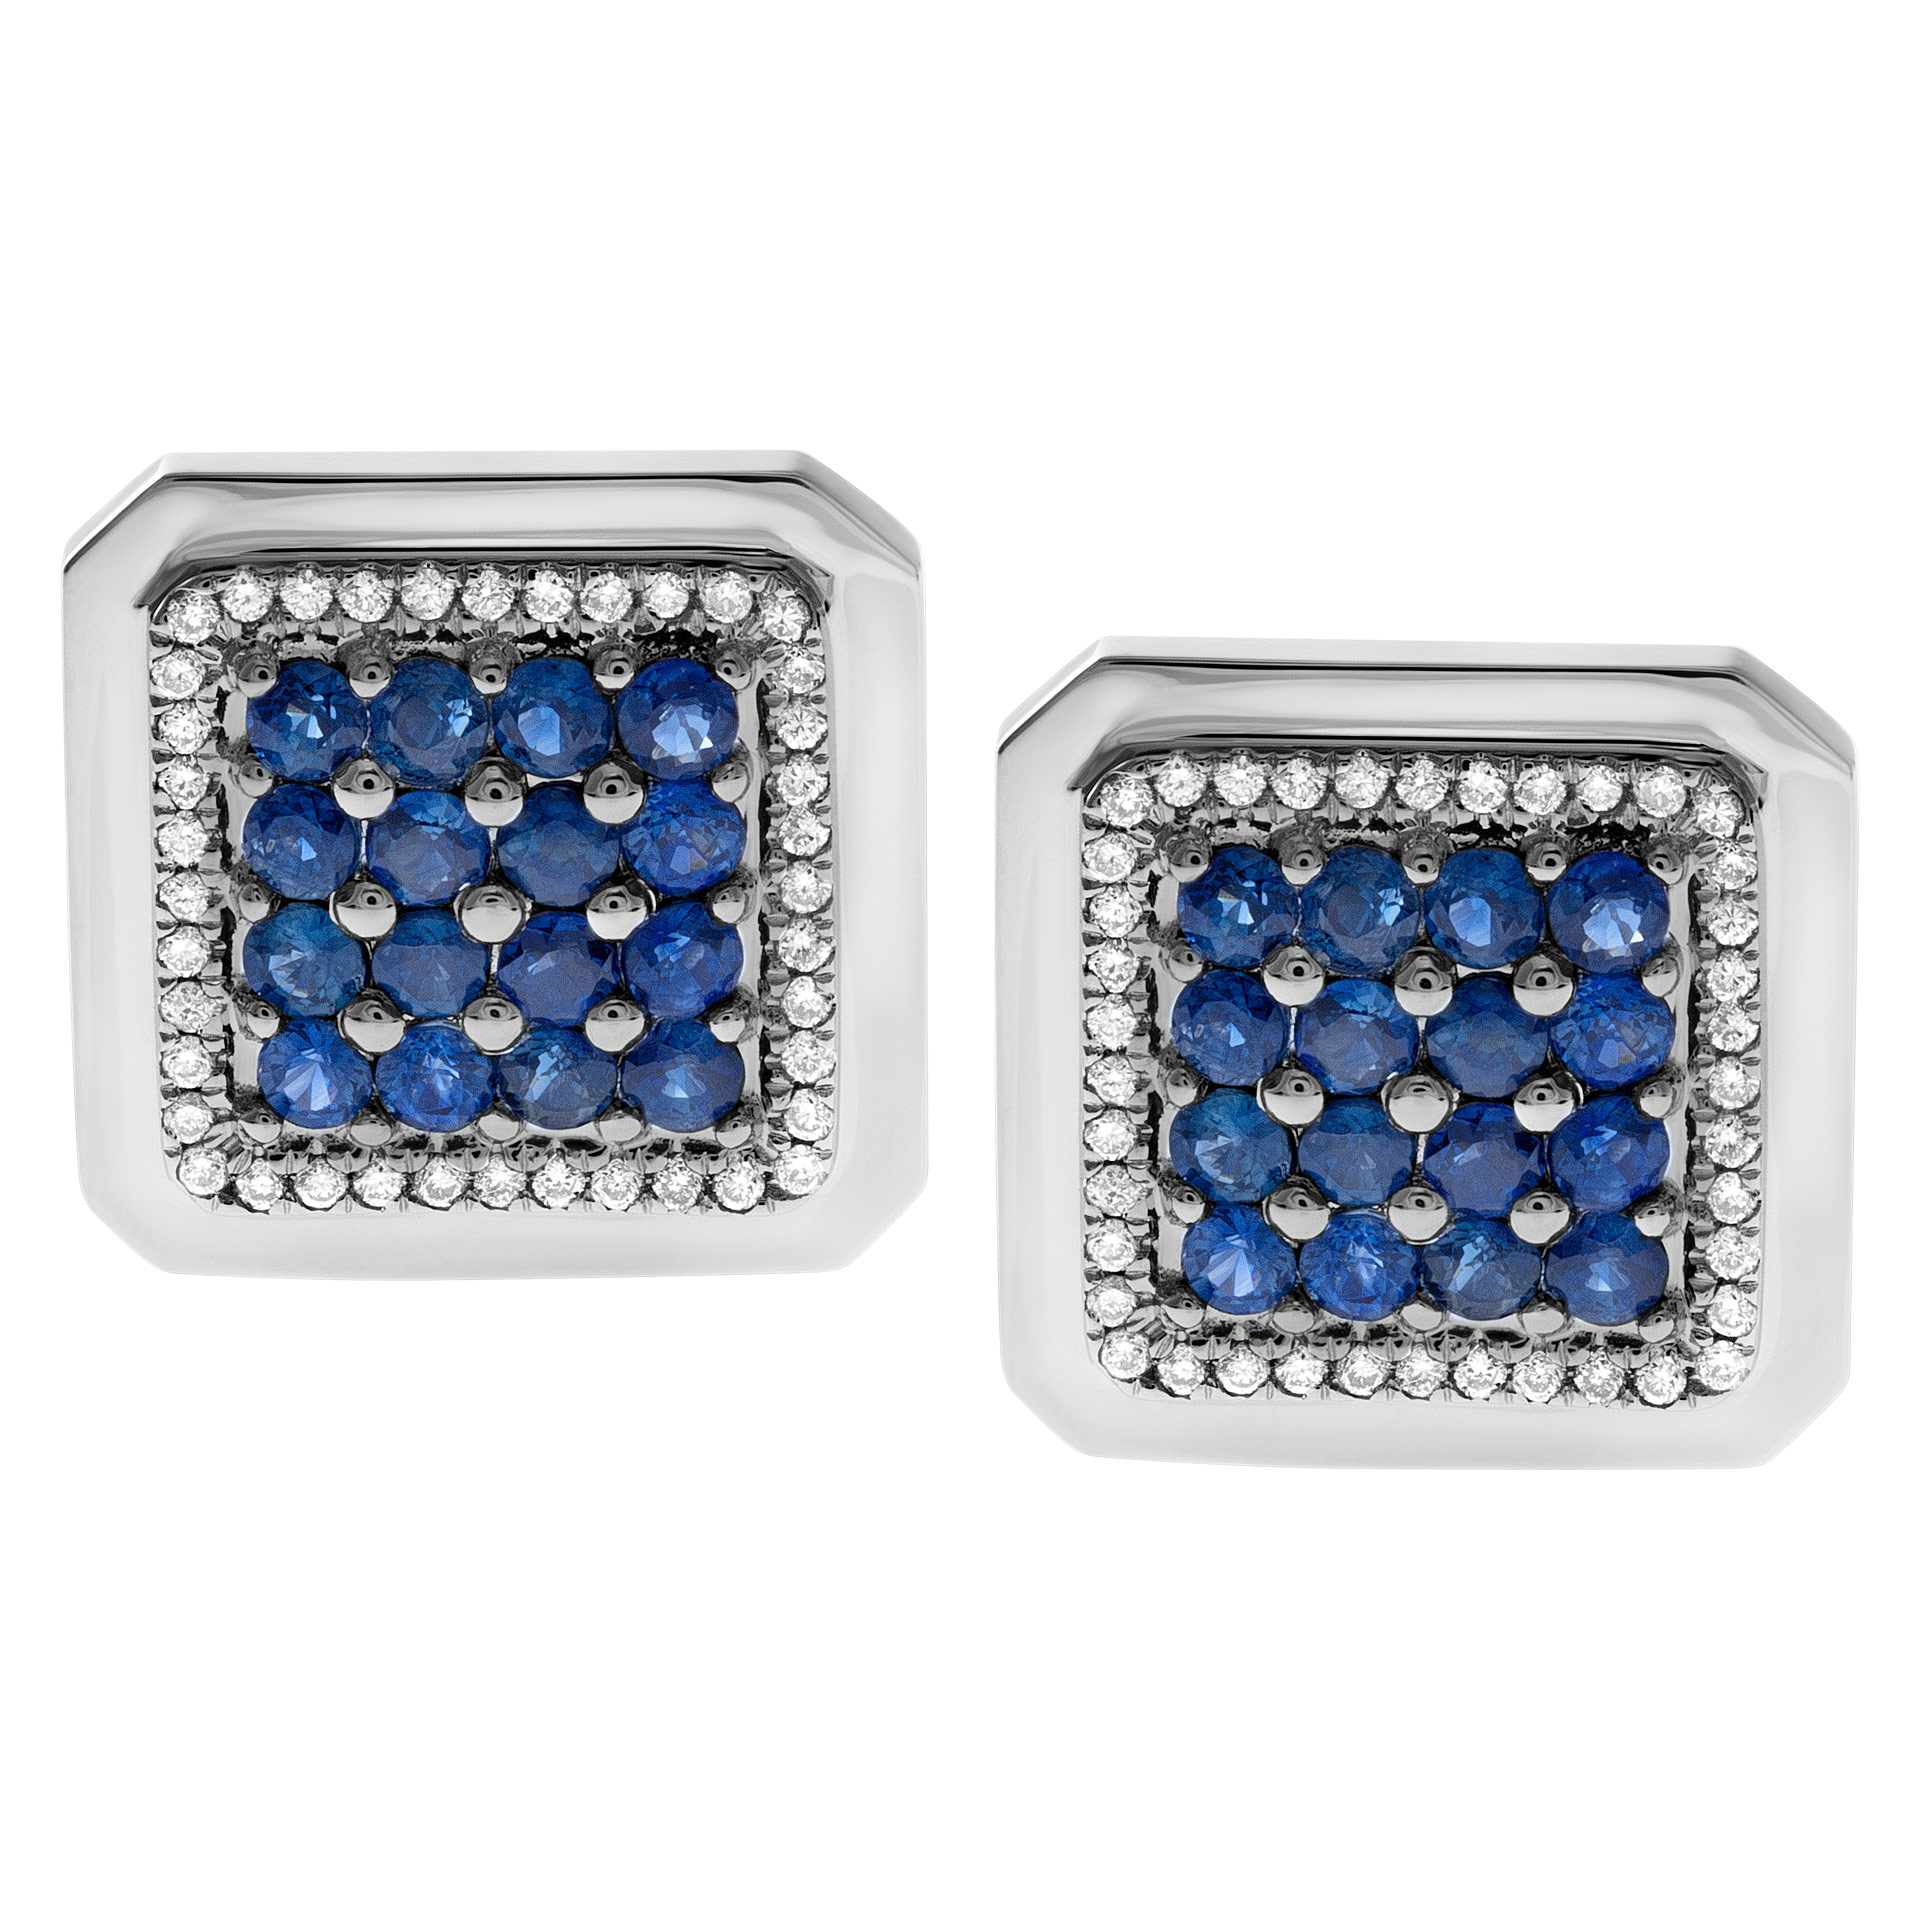 Elegant blue sapphire and diamond cufflinks with 3.20 carats in sapphires and 0.40 cts in diamonds